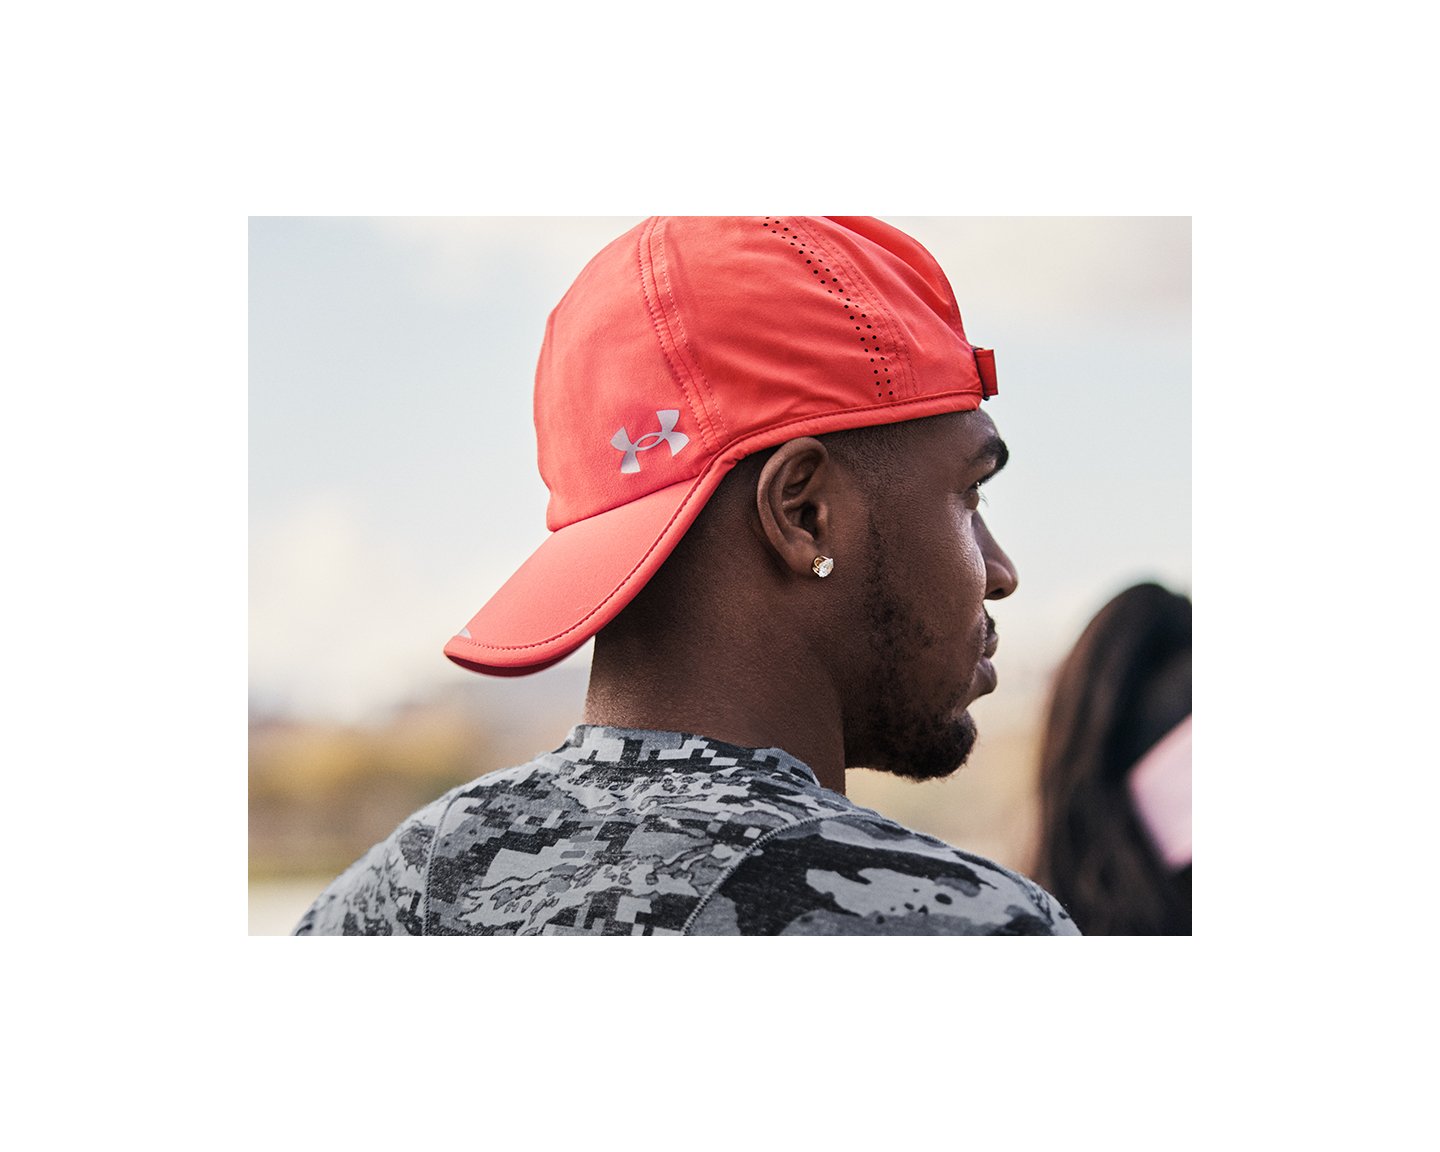 https://underarmour.scene7.com/is/image/Underarmour/SS21_ACC_IsoChillLaunchHat_Site_5_4_M_3_?qlt=85&wid=1440&hei=1152&size=1440,1152